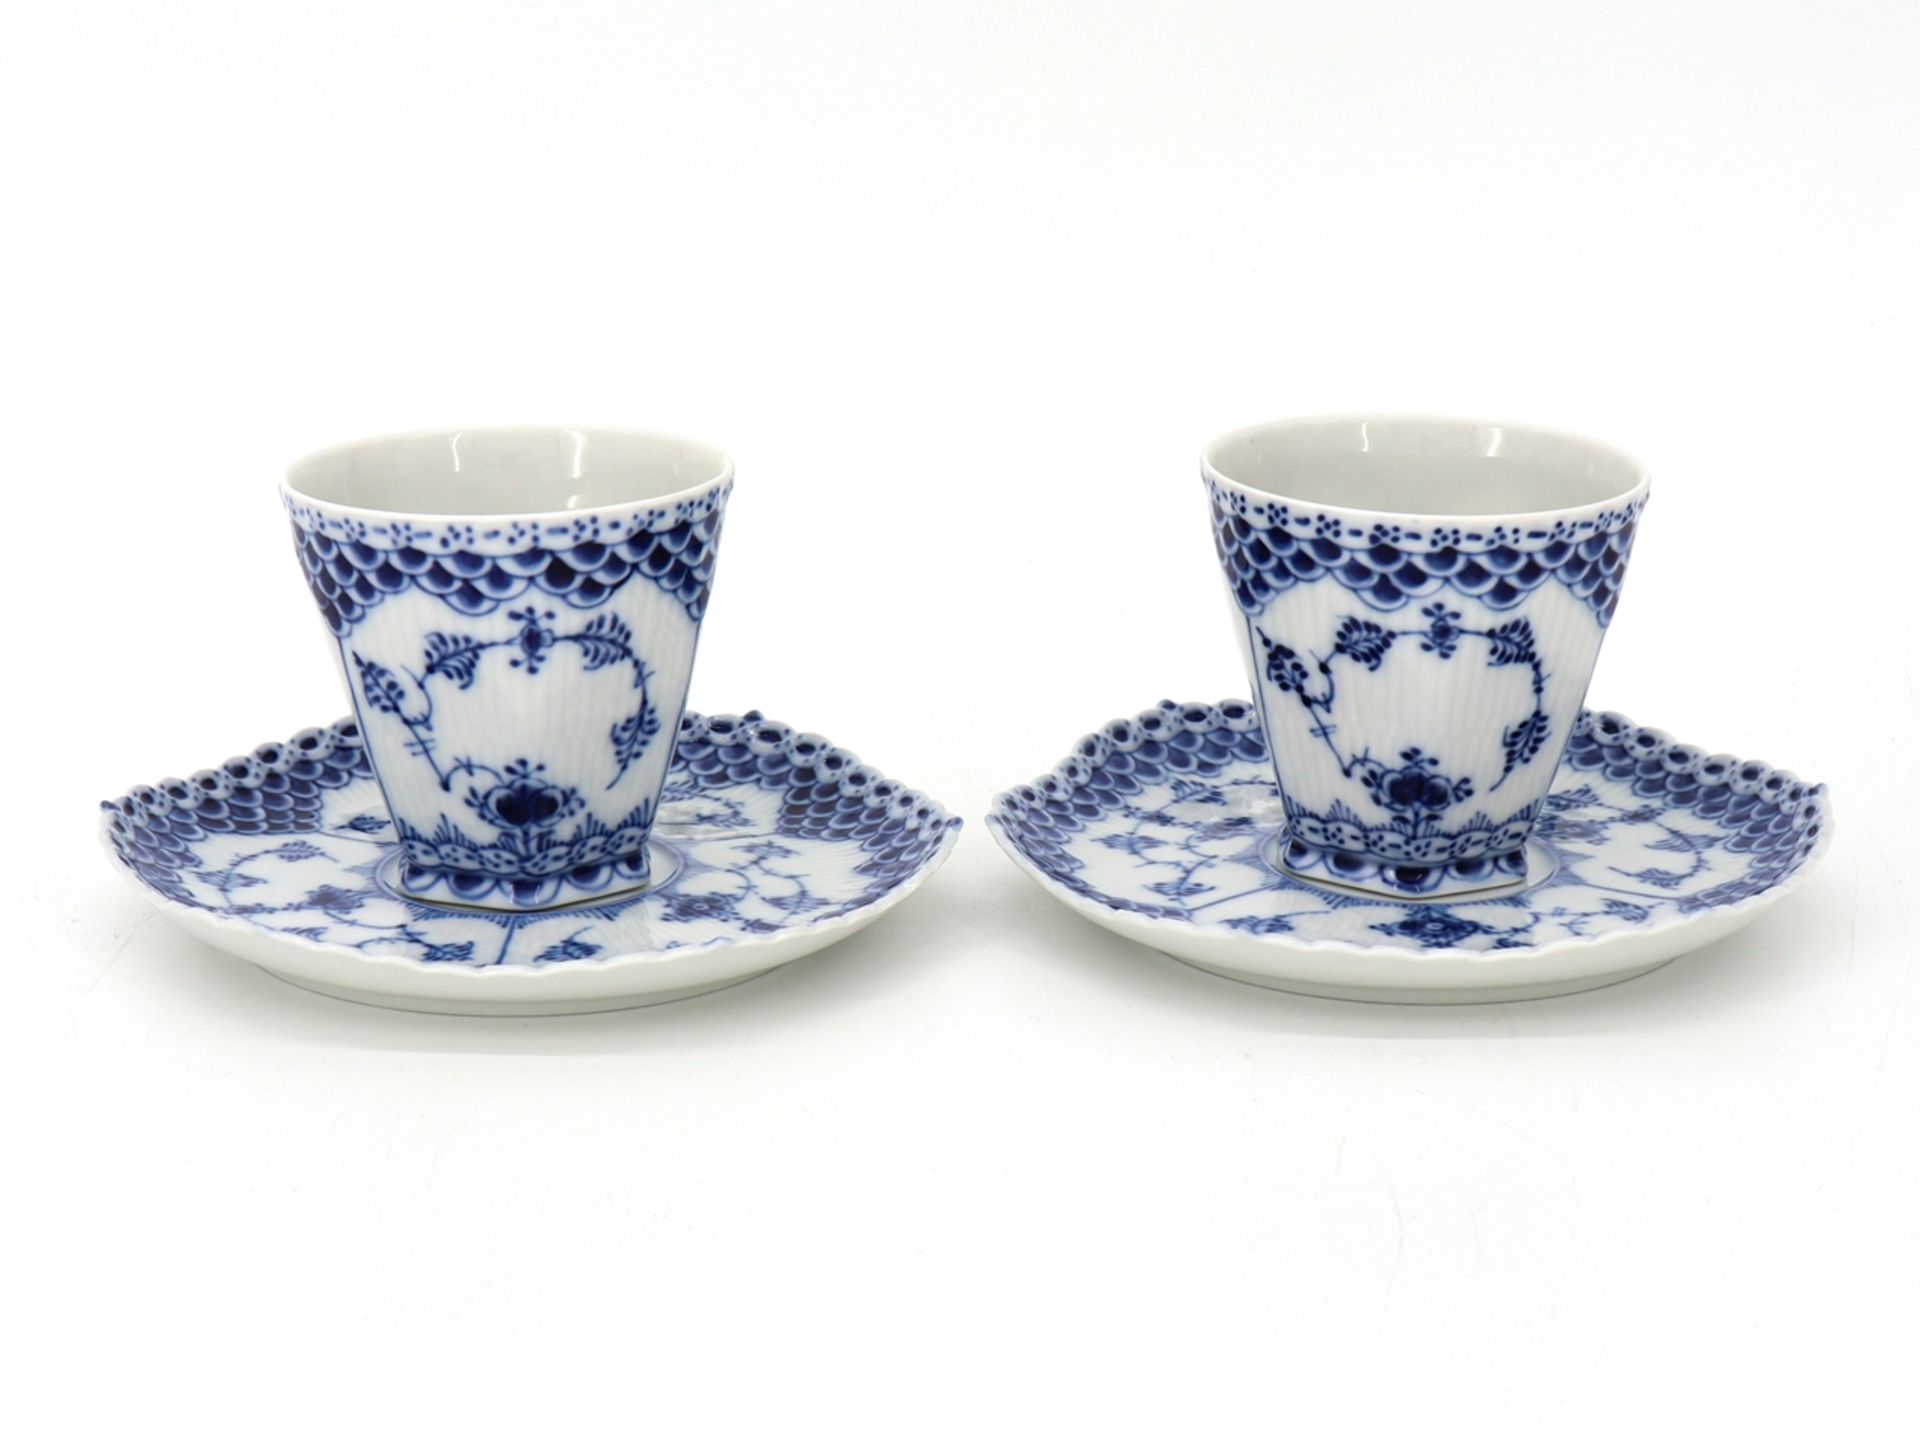 2 Royal Copenhagen Musselmalet Full Point Coffee Cups, No.: 1036 - Image 2 of 6